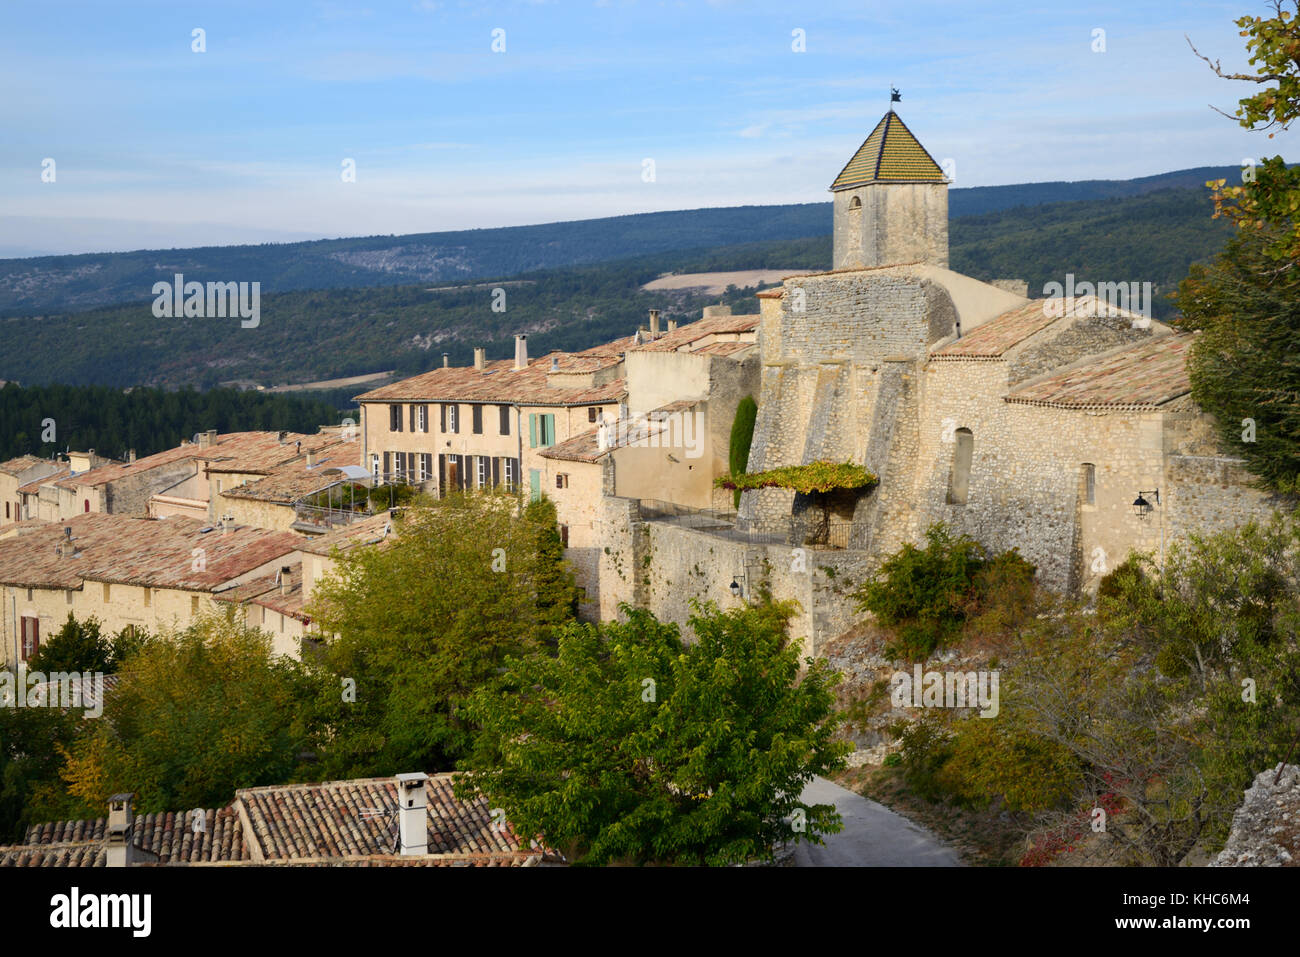 View over the Village of Aurel (near Sault) Vaucluse, Provence, France Stock Photo